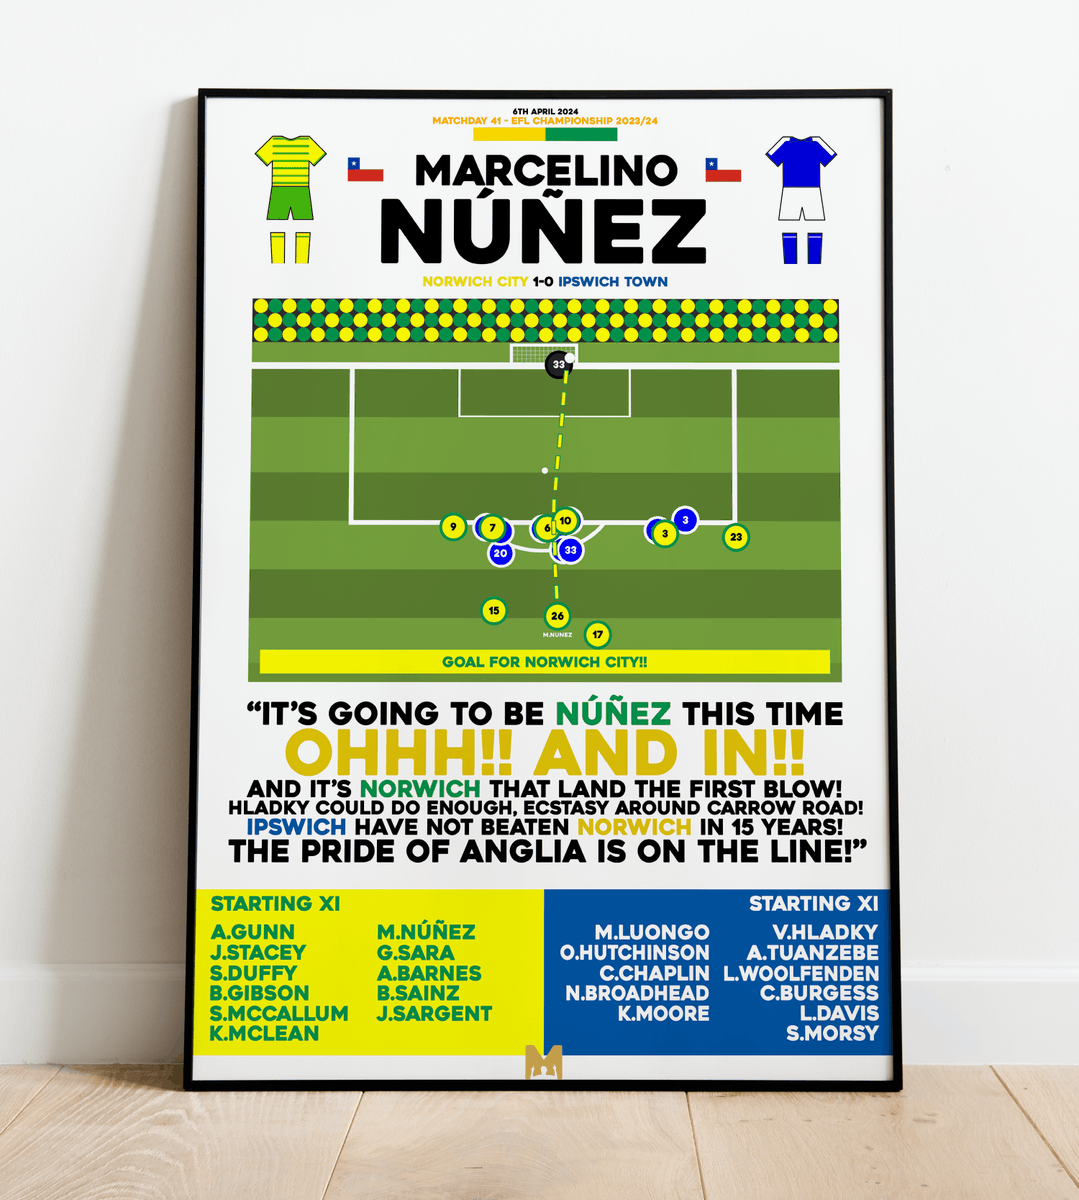 🚨NEW DROPS🚨 Congrats to the Canaires for winning the East Anglian Derby!🟡 We're happy to release a Framed Print to make any Norwich City Fan Happy!🔰 Marcelino Núñez v Ipswich Town🇨🇱 CODE: ‘NCFC' for 15% OFF All Norwich Items✅ ➡️mezzaladesigns.co.uk/collections/no… #NCFC #OTBC